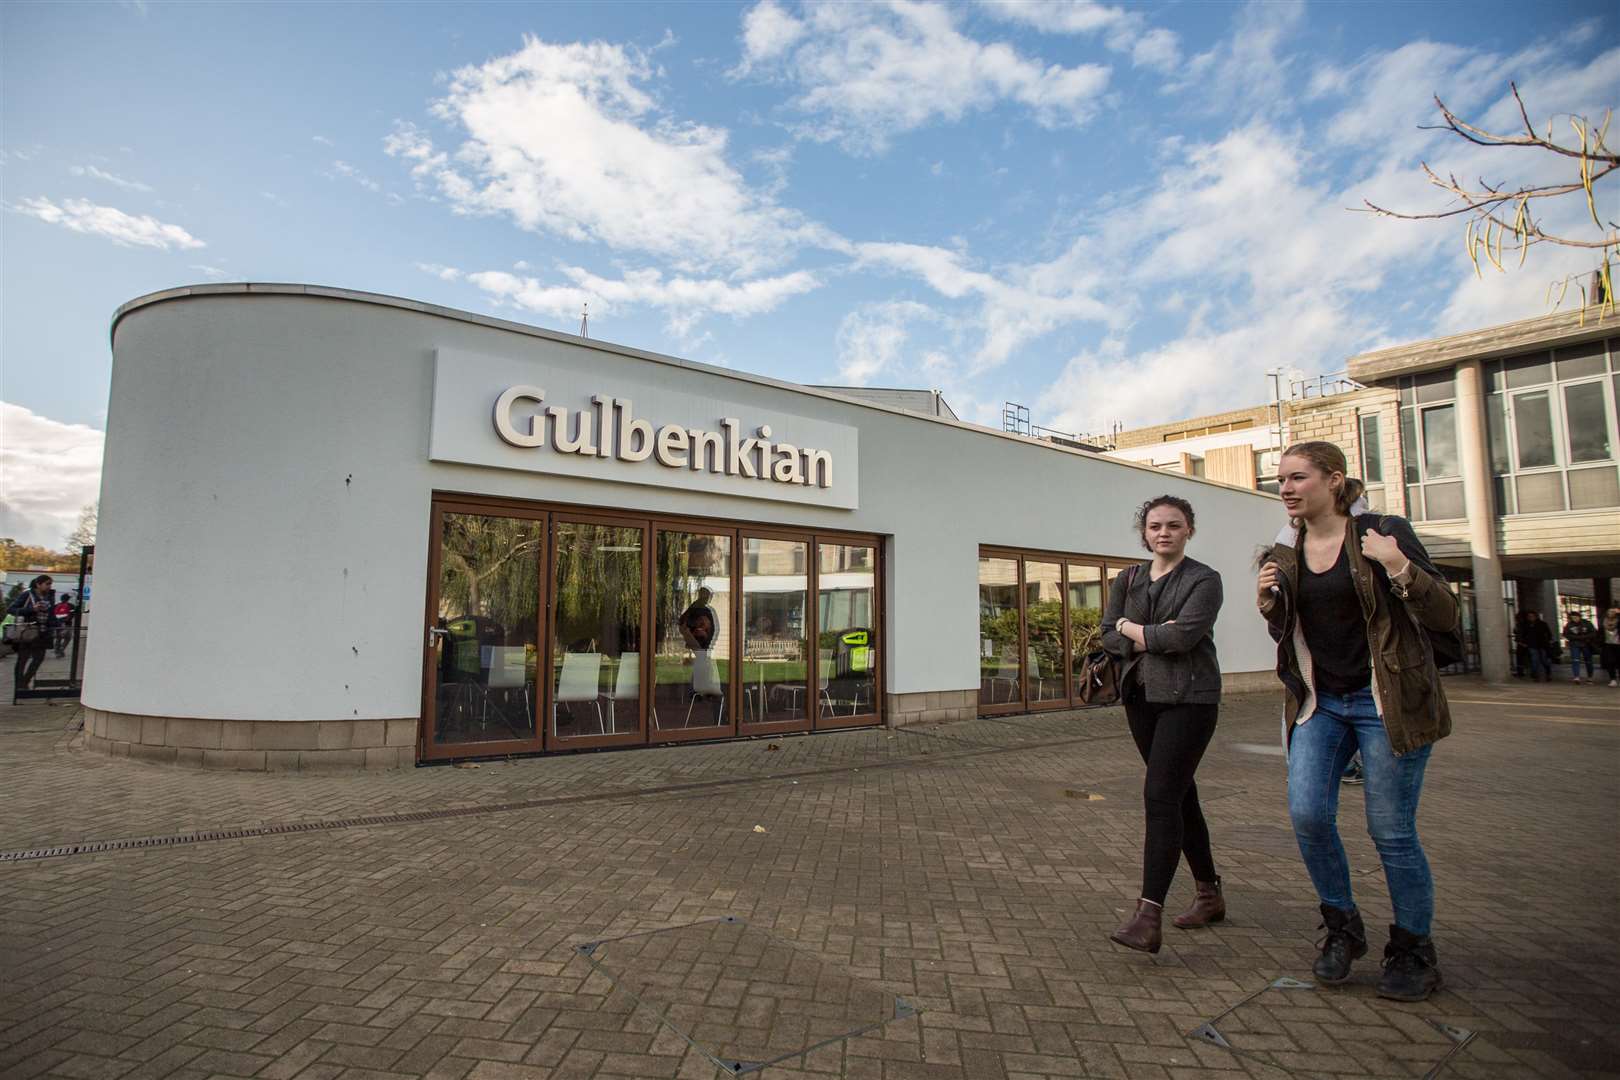 Melting Vinyl has worked with the Gulbenkian in Canterbury helping to advise on its live music programme